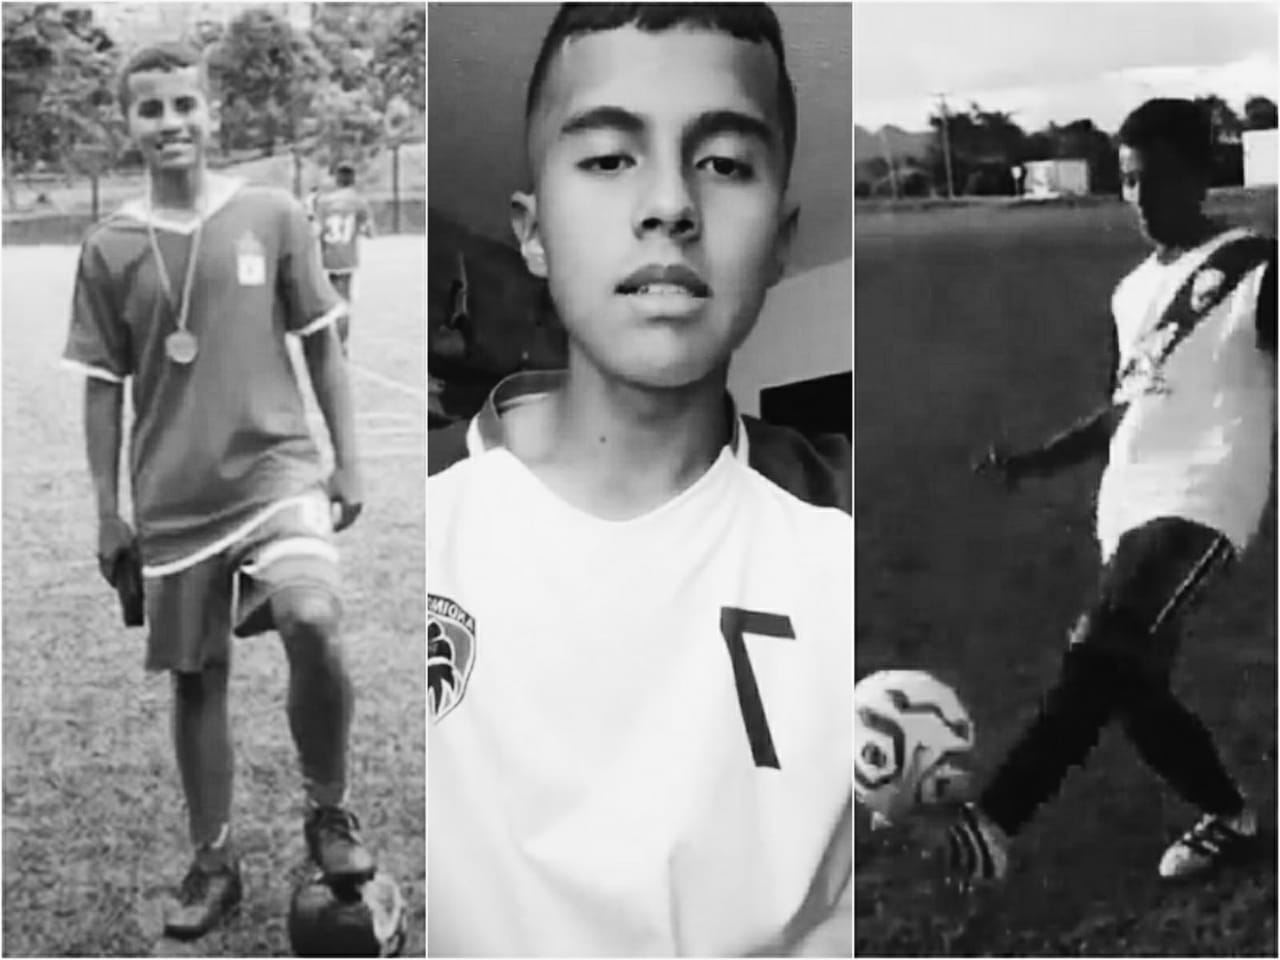 Miller, the promising soccer boy who was killed for stealing a cell phone in Bogotá